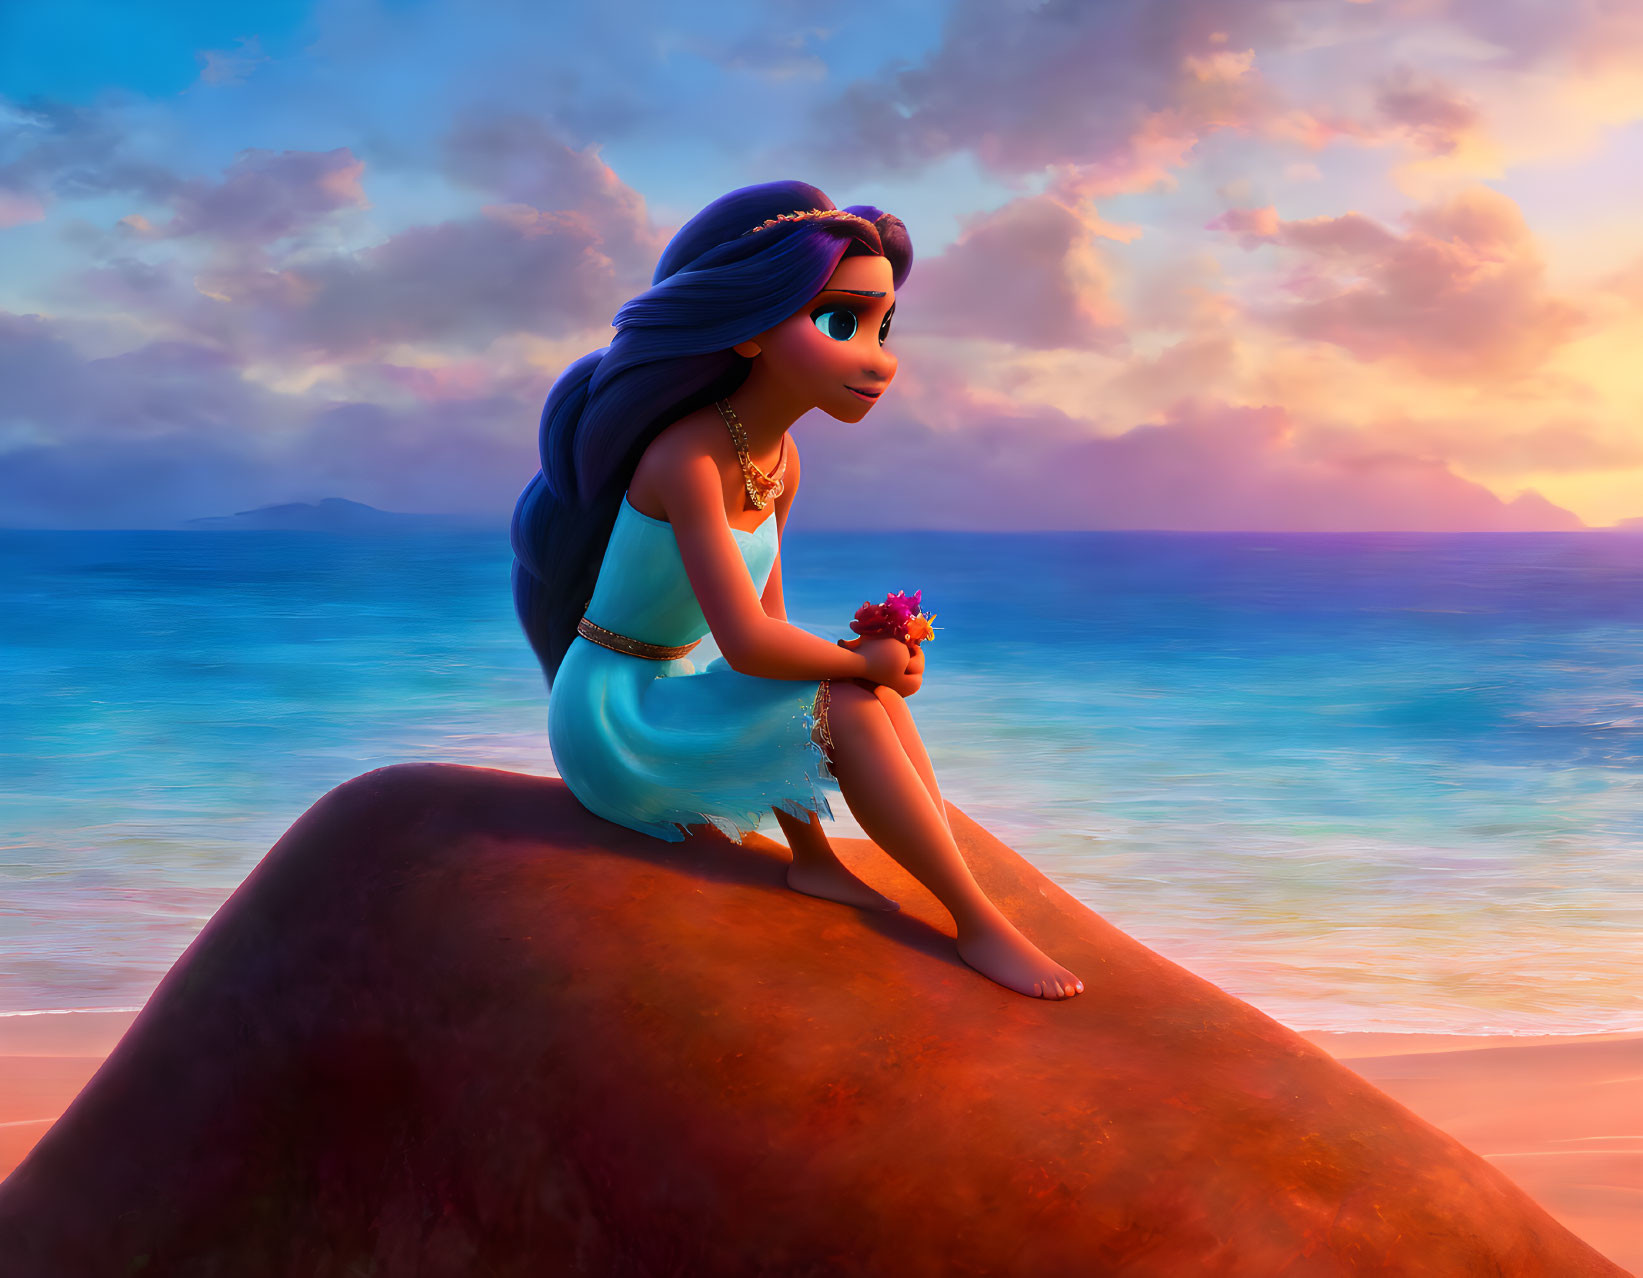 Young girl on ocean rock at sunset holding flower, with pensive look